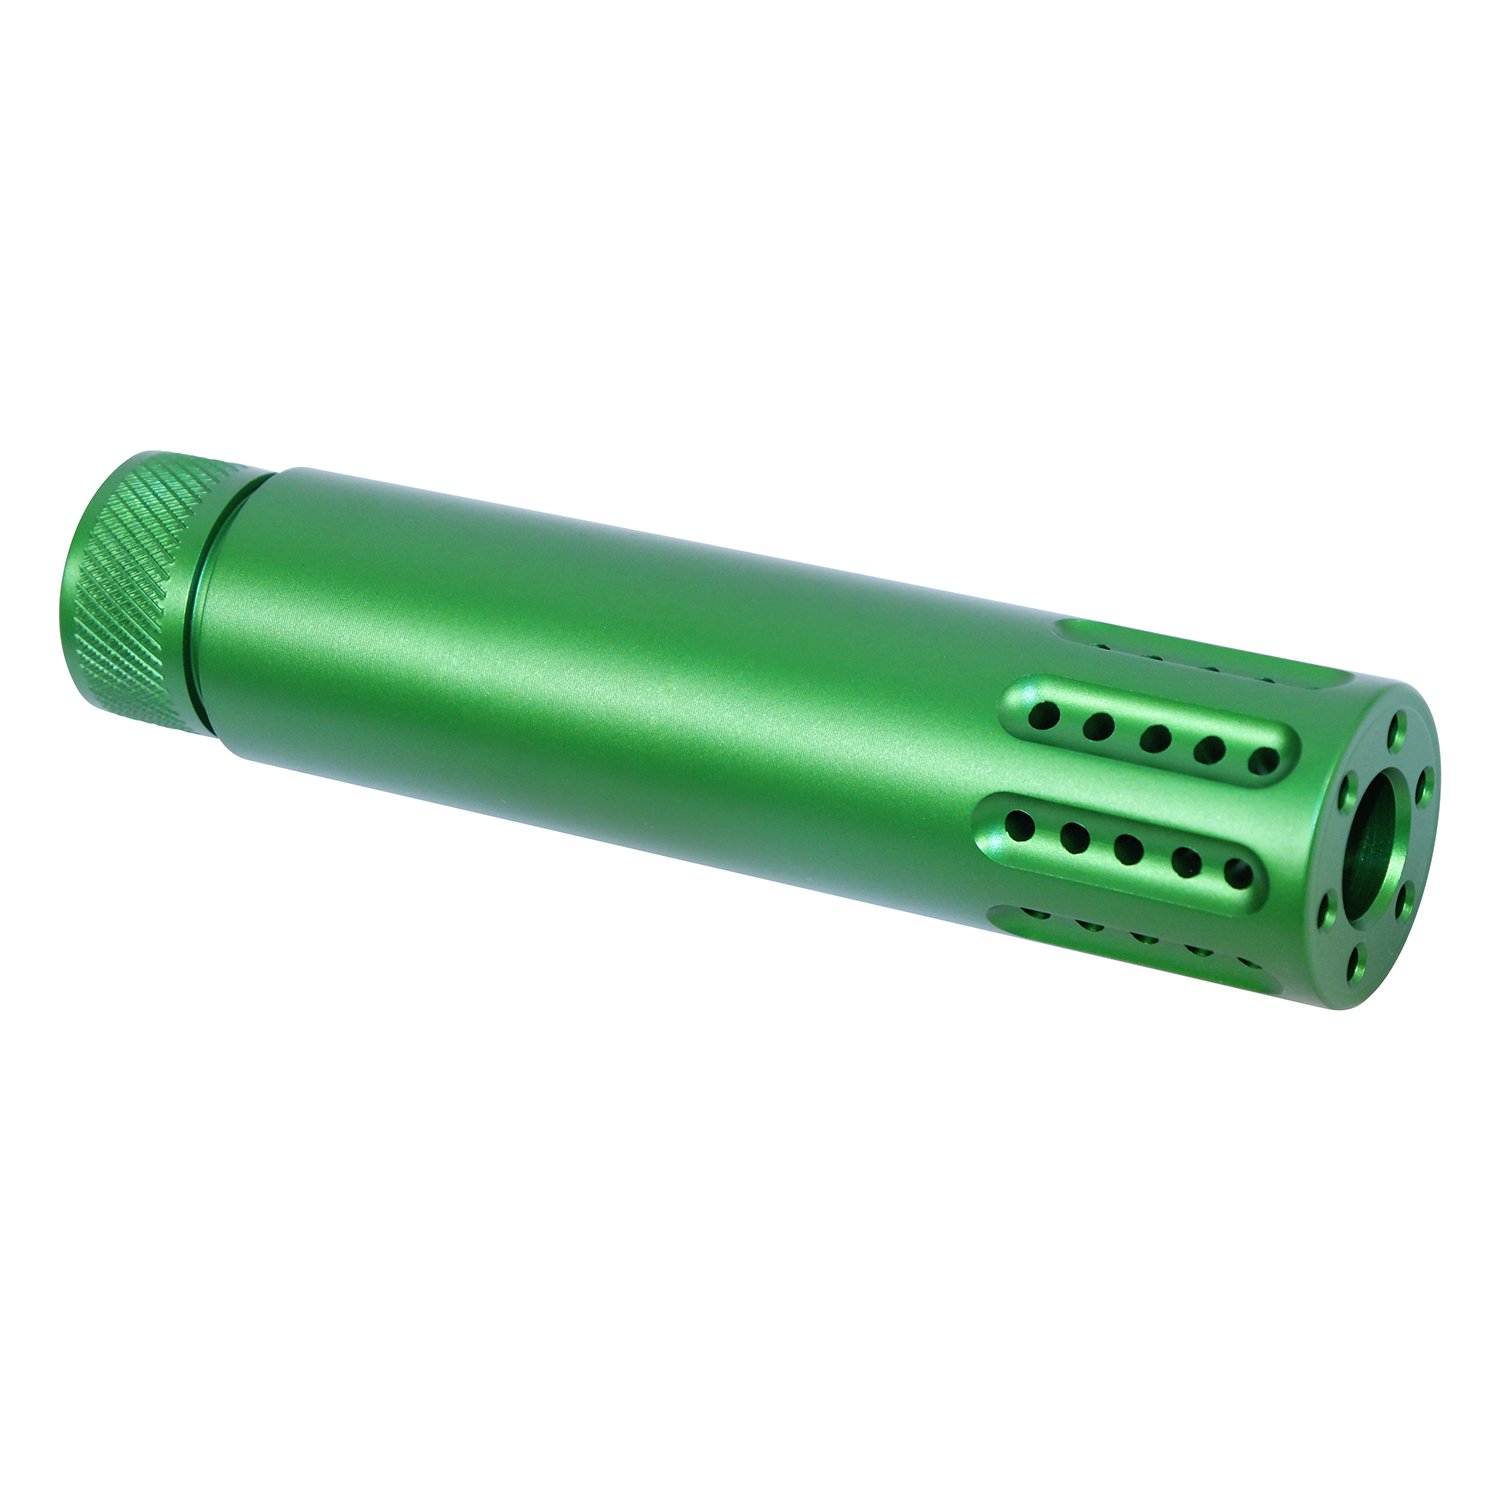 AR-15 barrel shroud and muzzle brake in anodized Irish green with multiple ports.